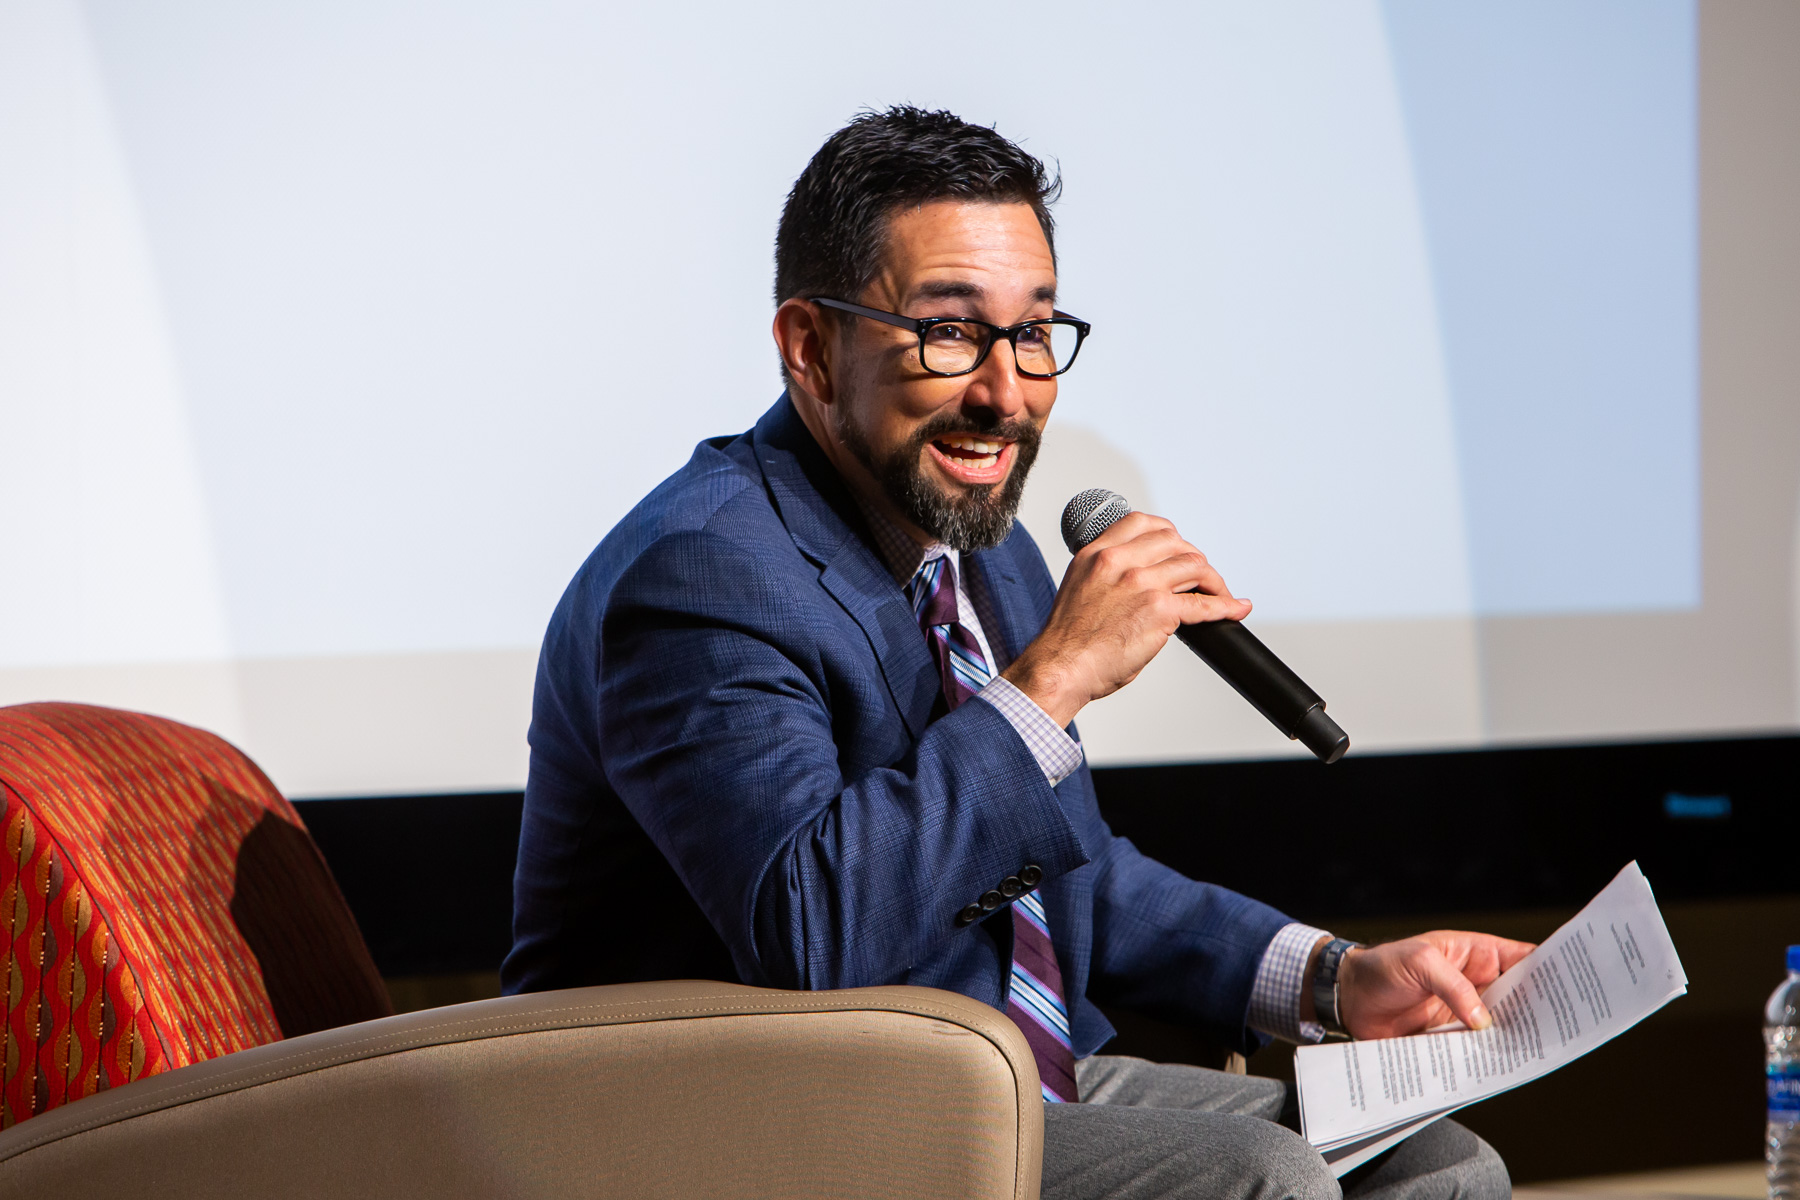 Before going into the panel discussion, Chris Tirres, associate professor of religious studies, shares a brief list of Jose Vargas's accolades in both journalism and activisim. (DePaul University/Randall Spriggs)